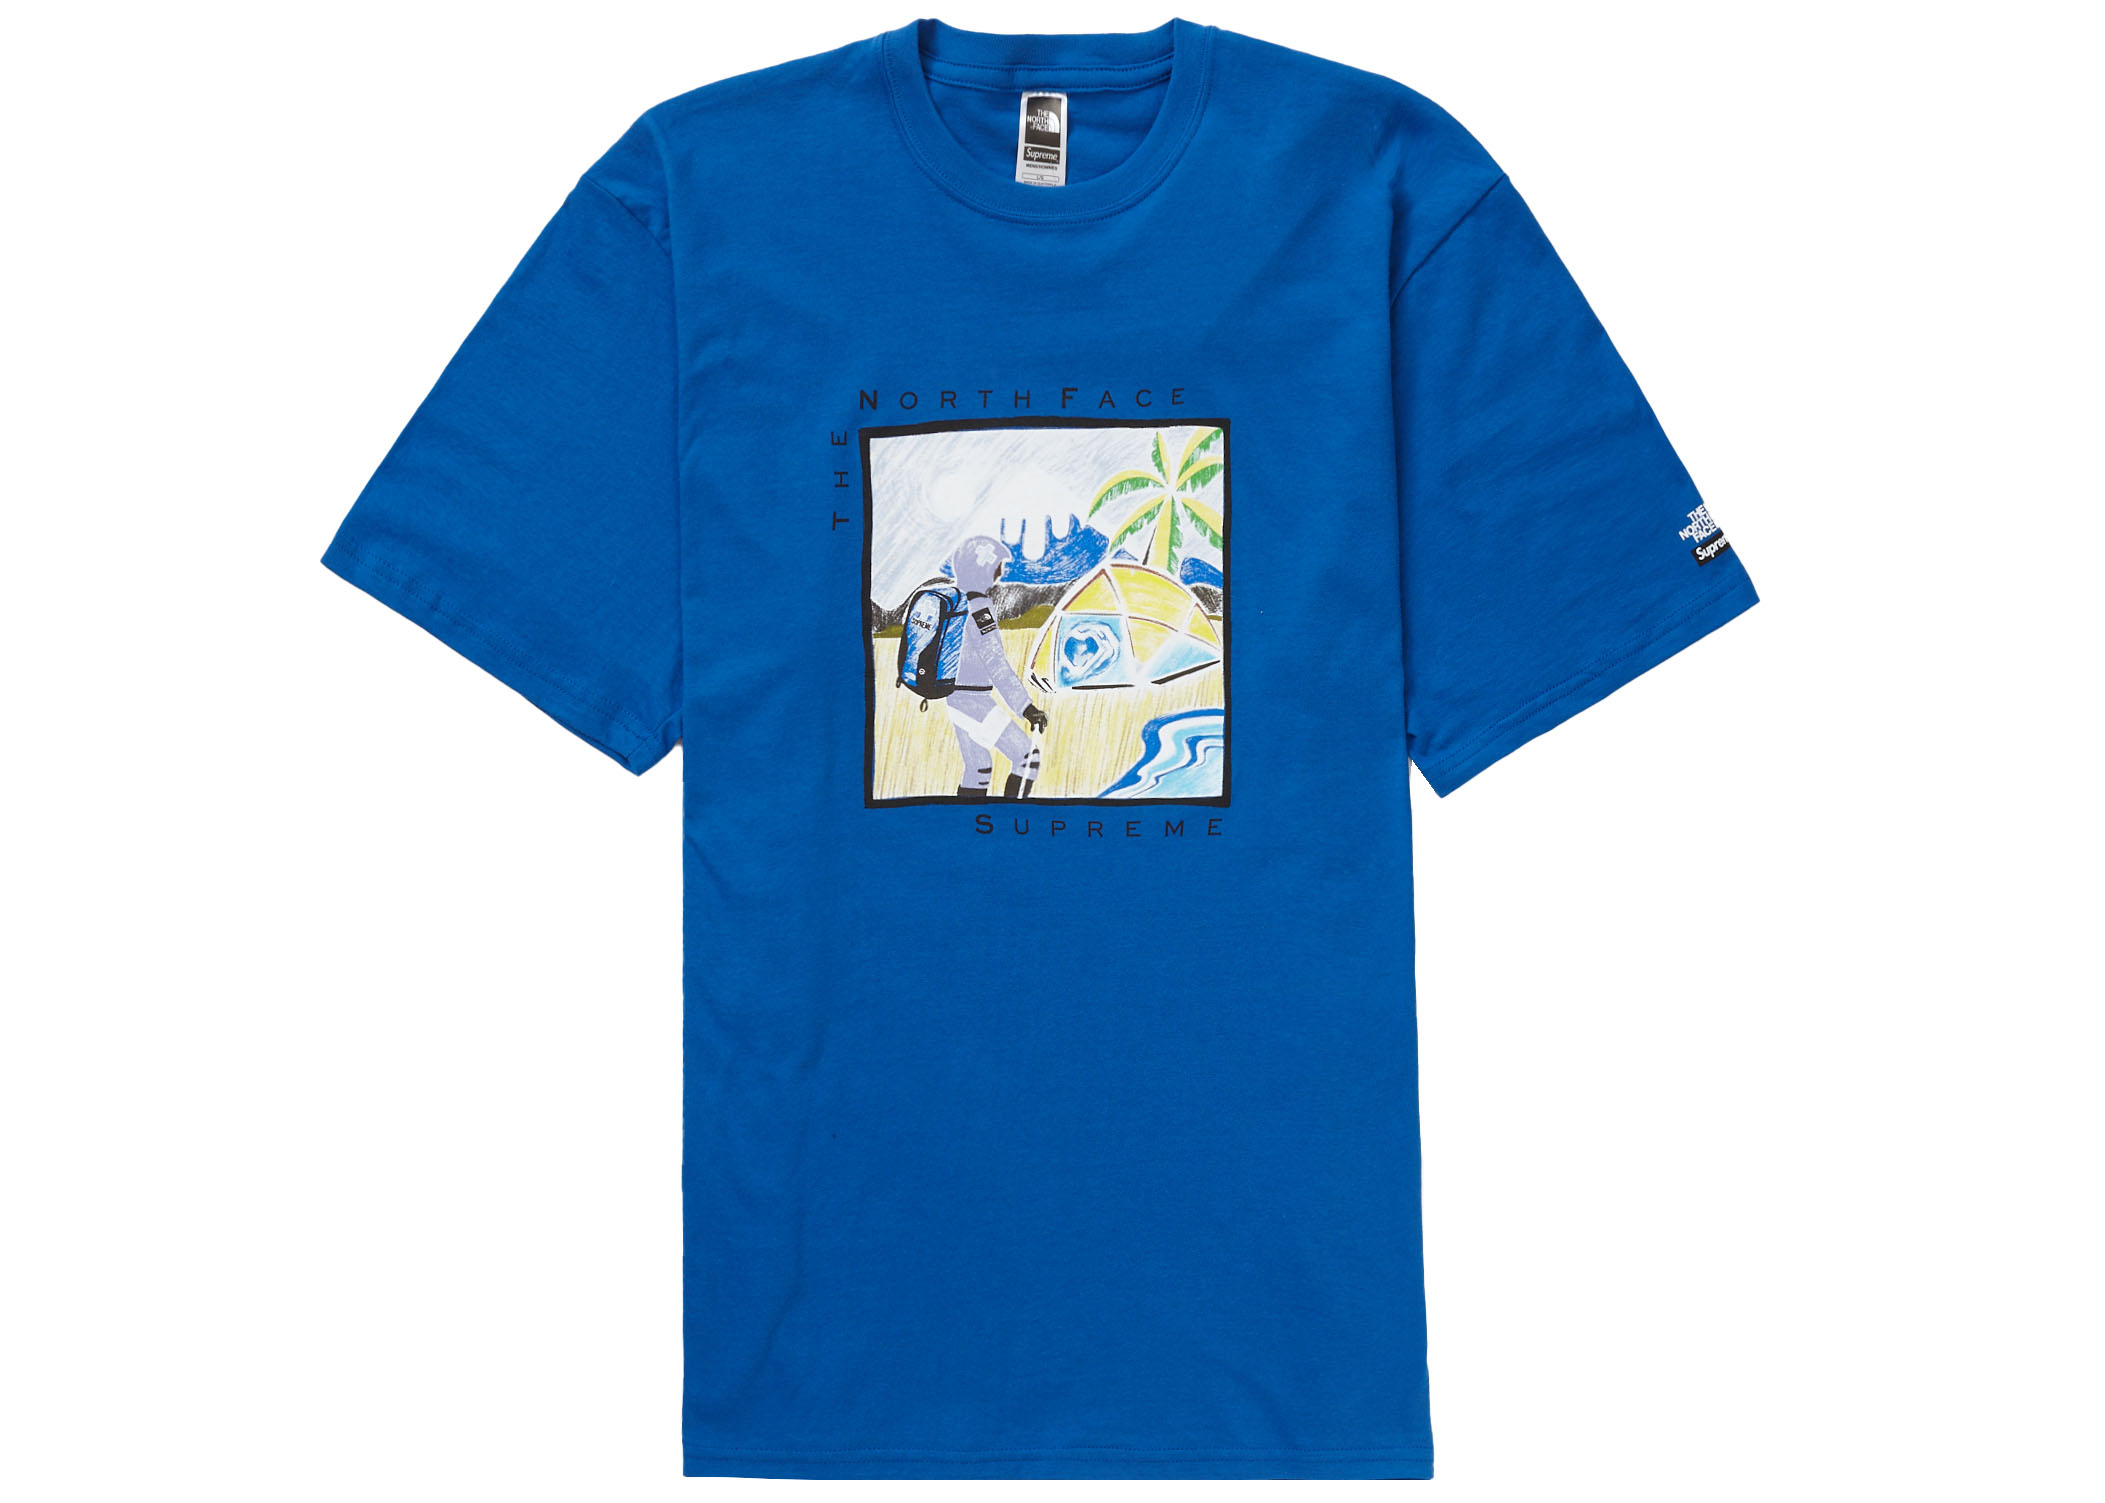 NEW低価 Supreme The North Face Sketch S/S Top NY8qn-m26637945399